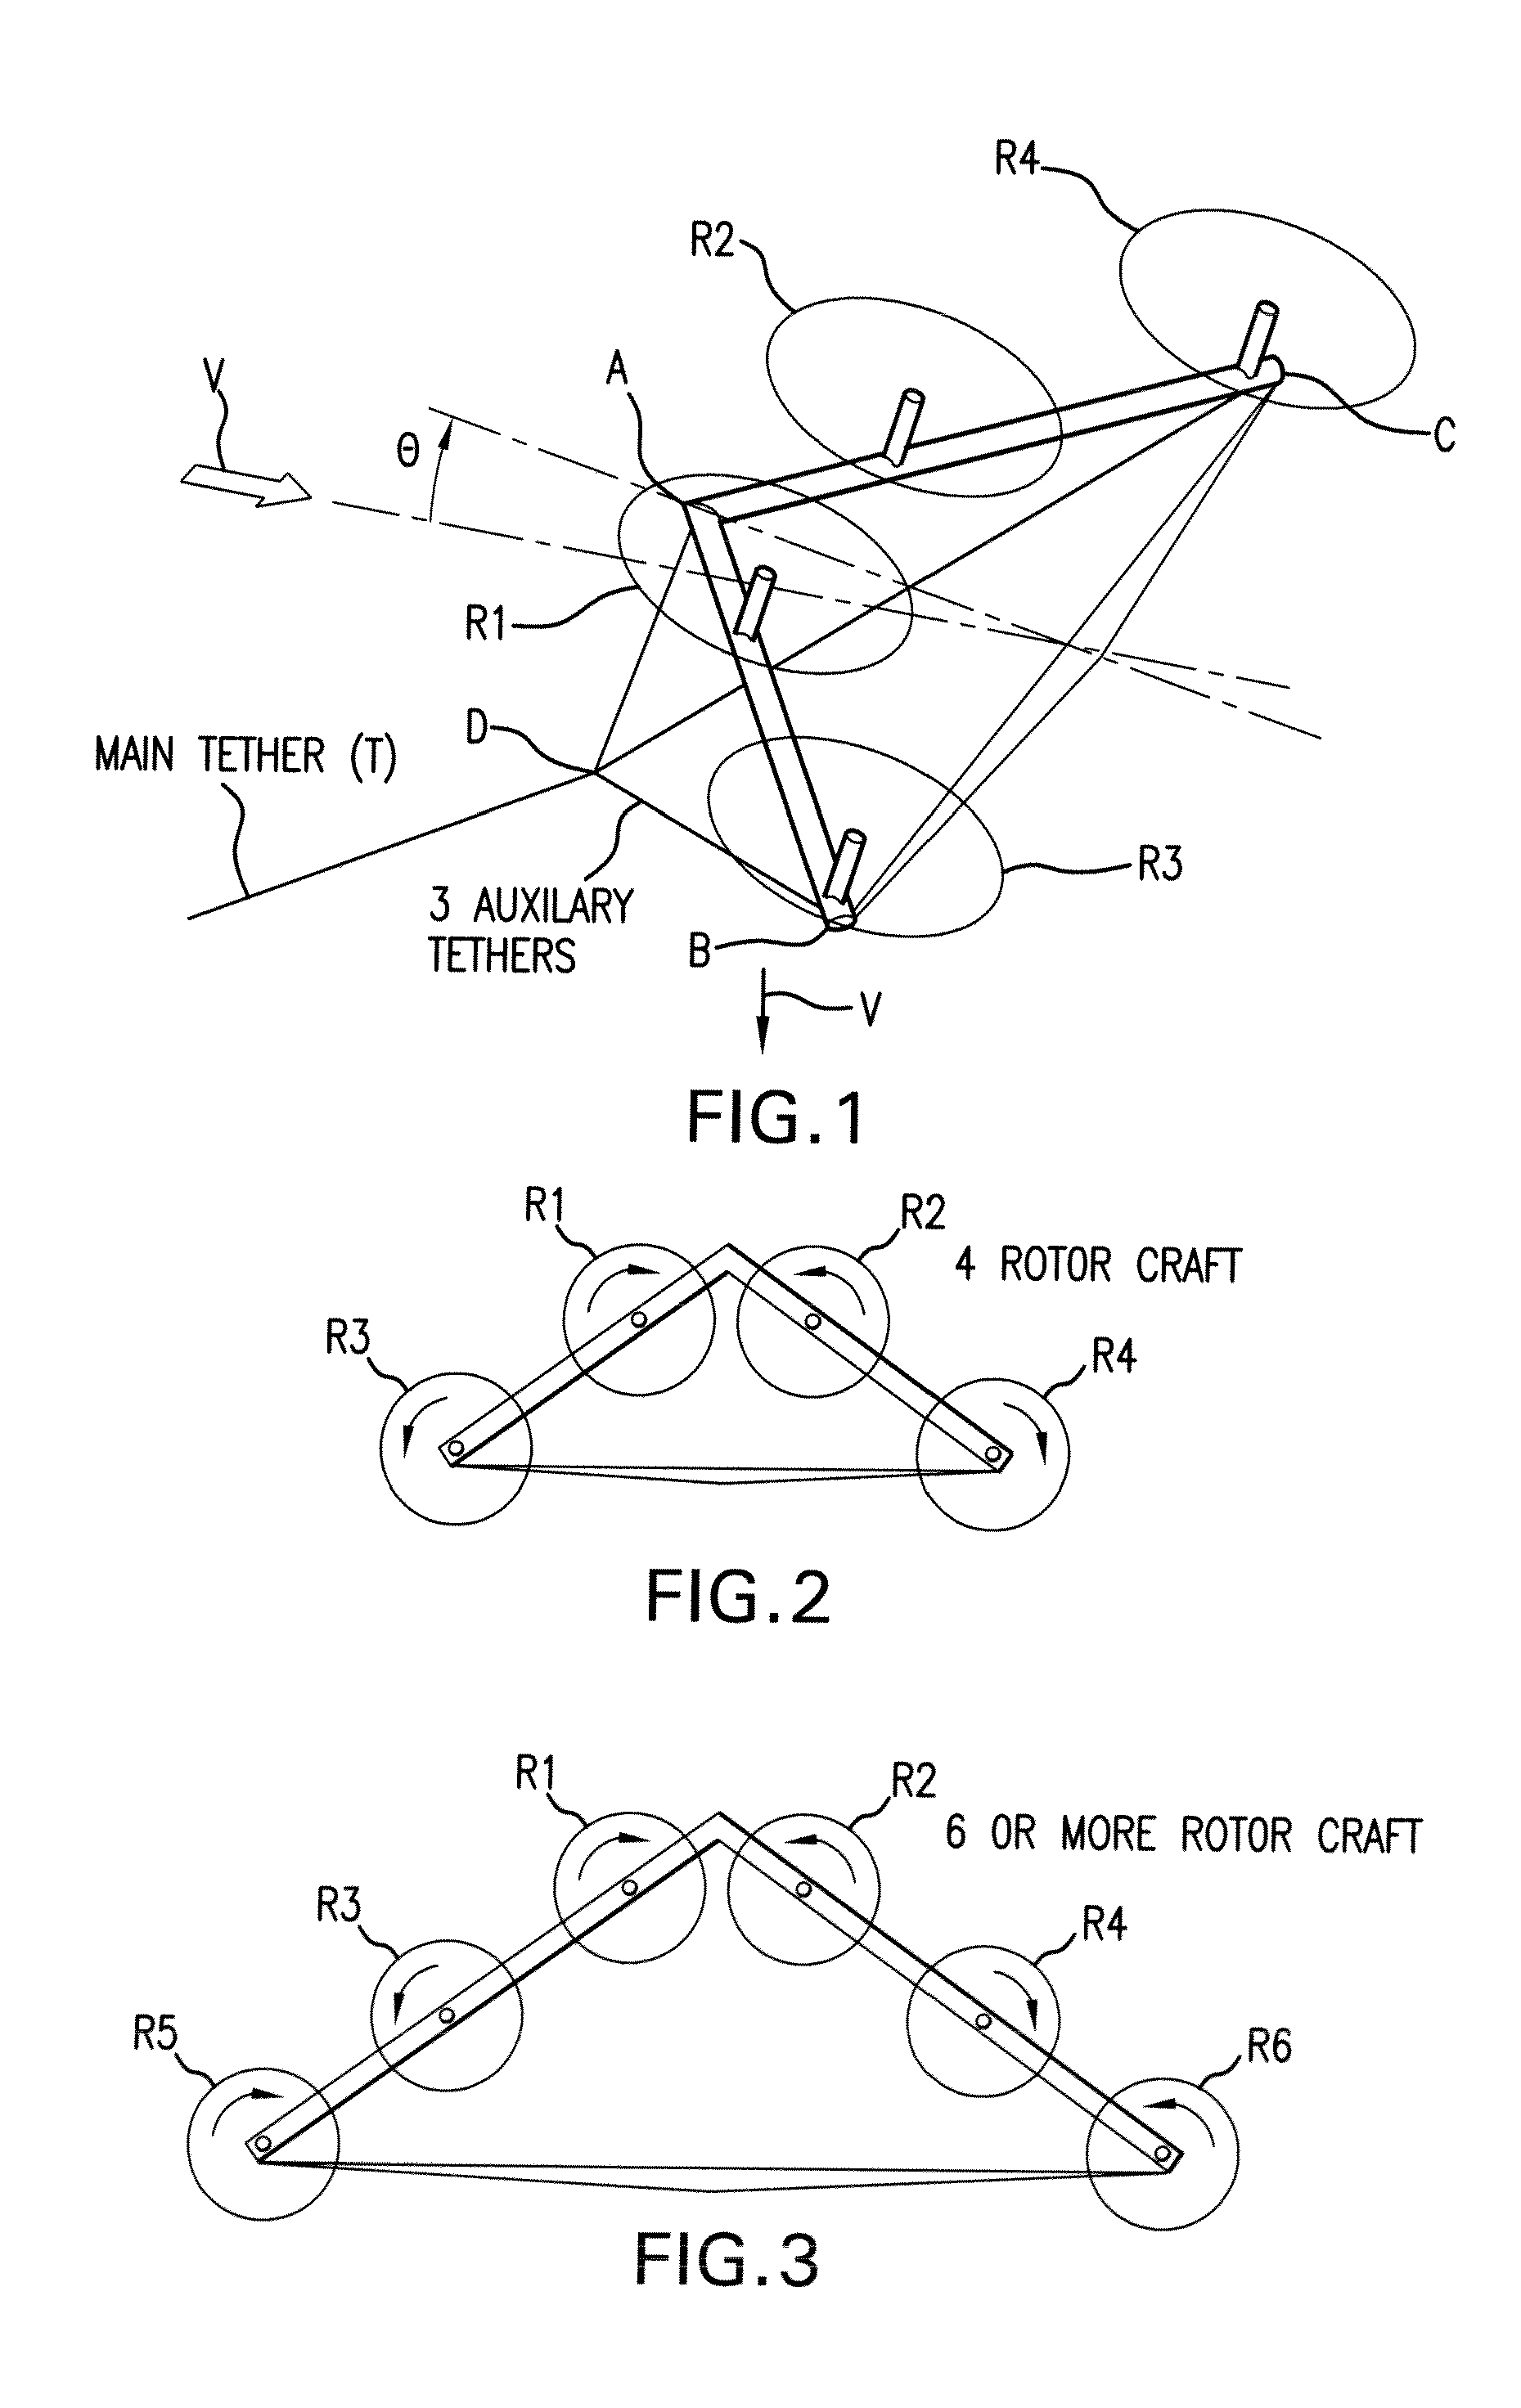 Tethered airborne wind-driven power generator